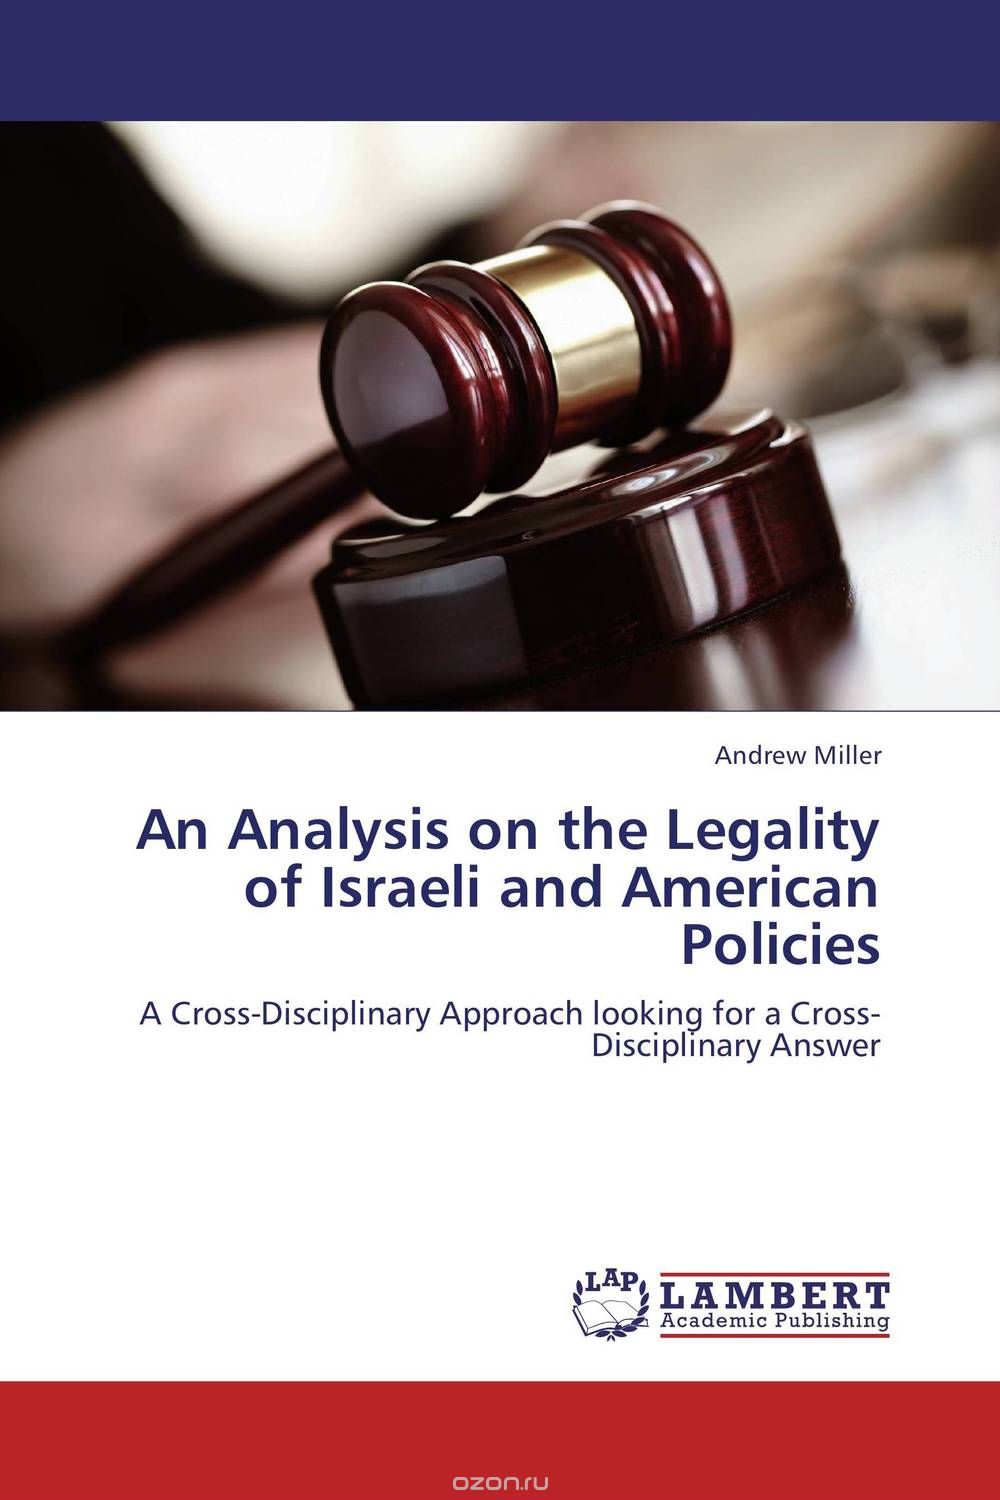 An Analysis on the Legality of Israeli and American Policies